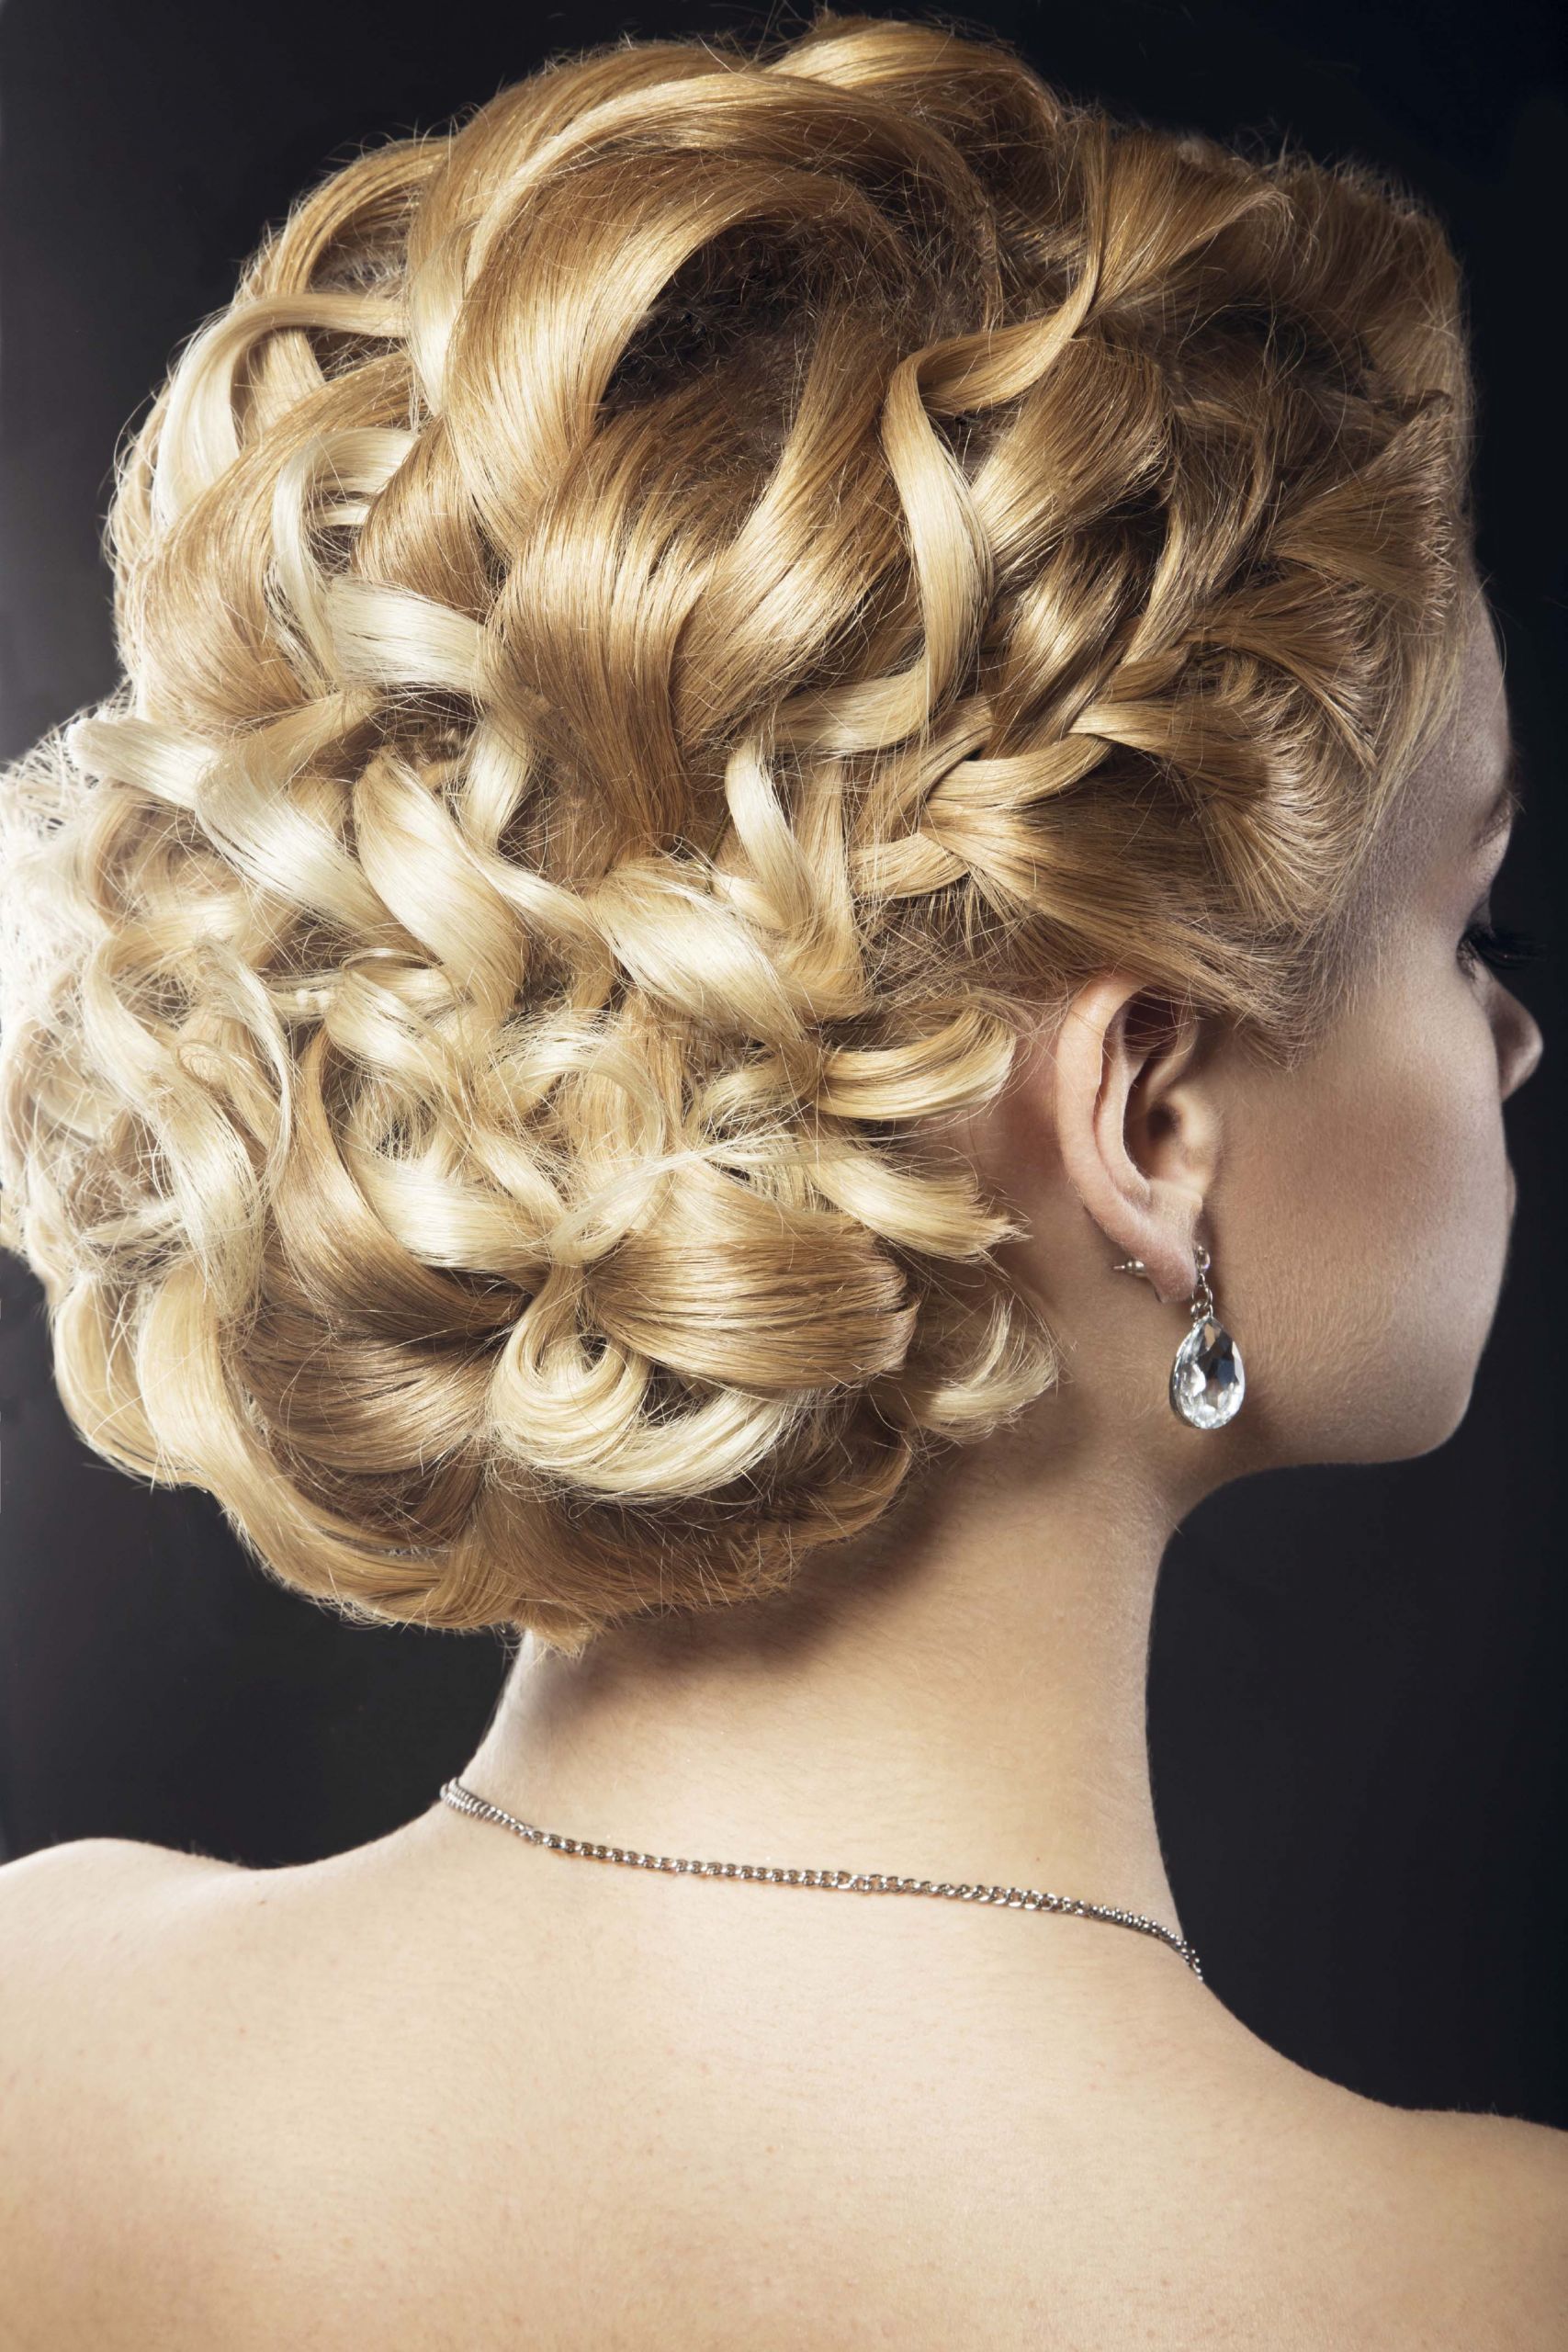 Curly Updo Wedding Hairstyles
 9 Spring Wedding Updos for Curly Hair